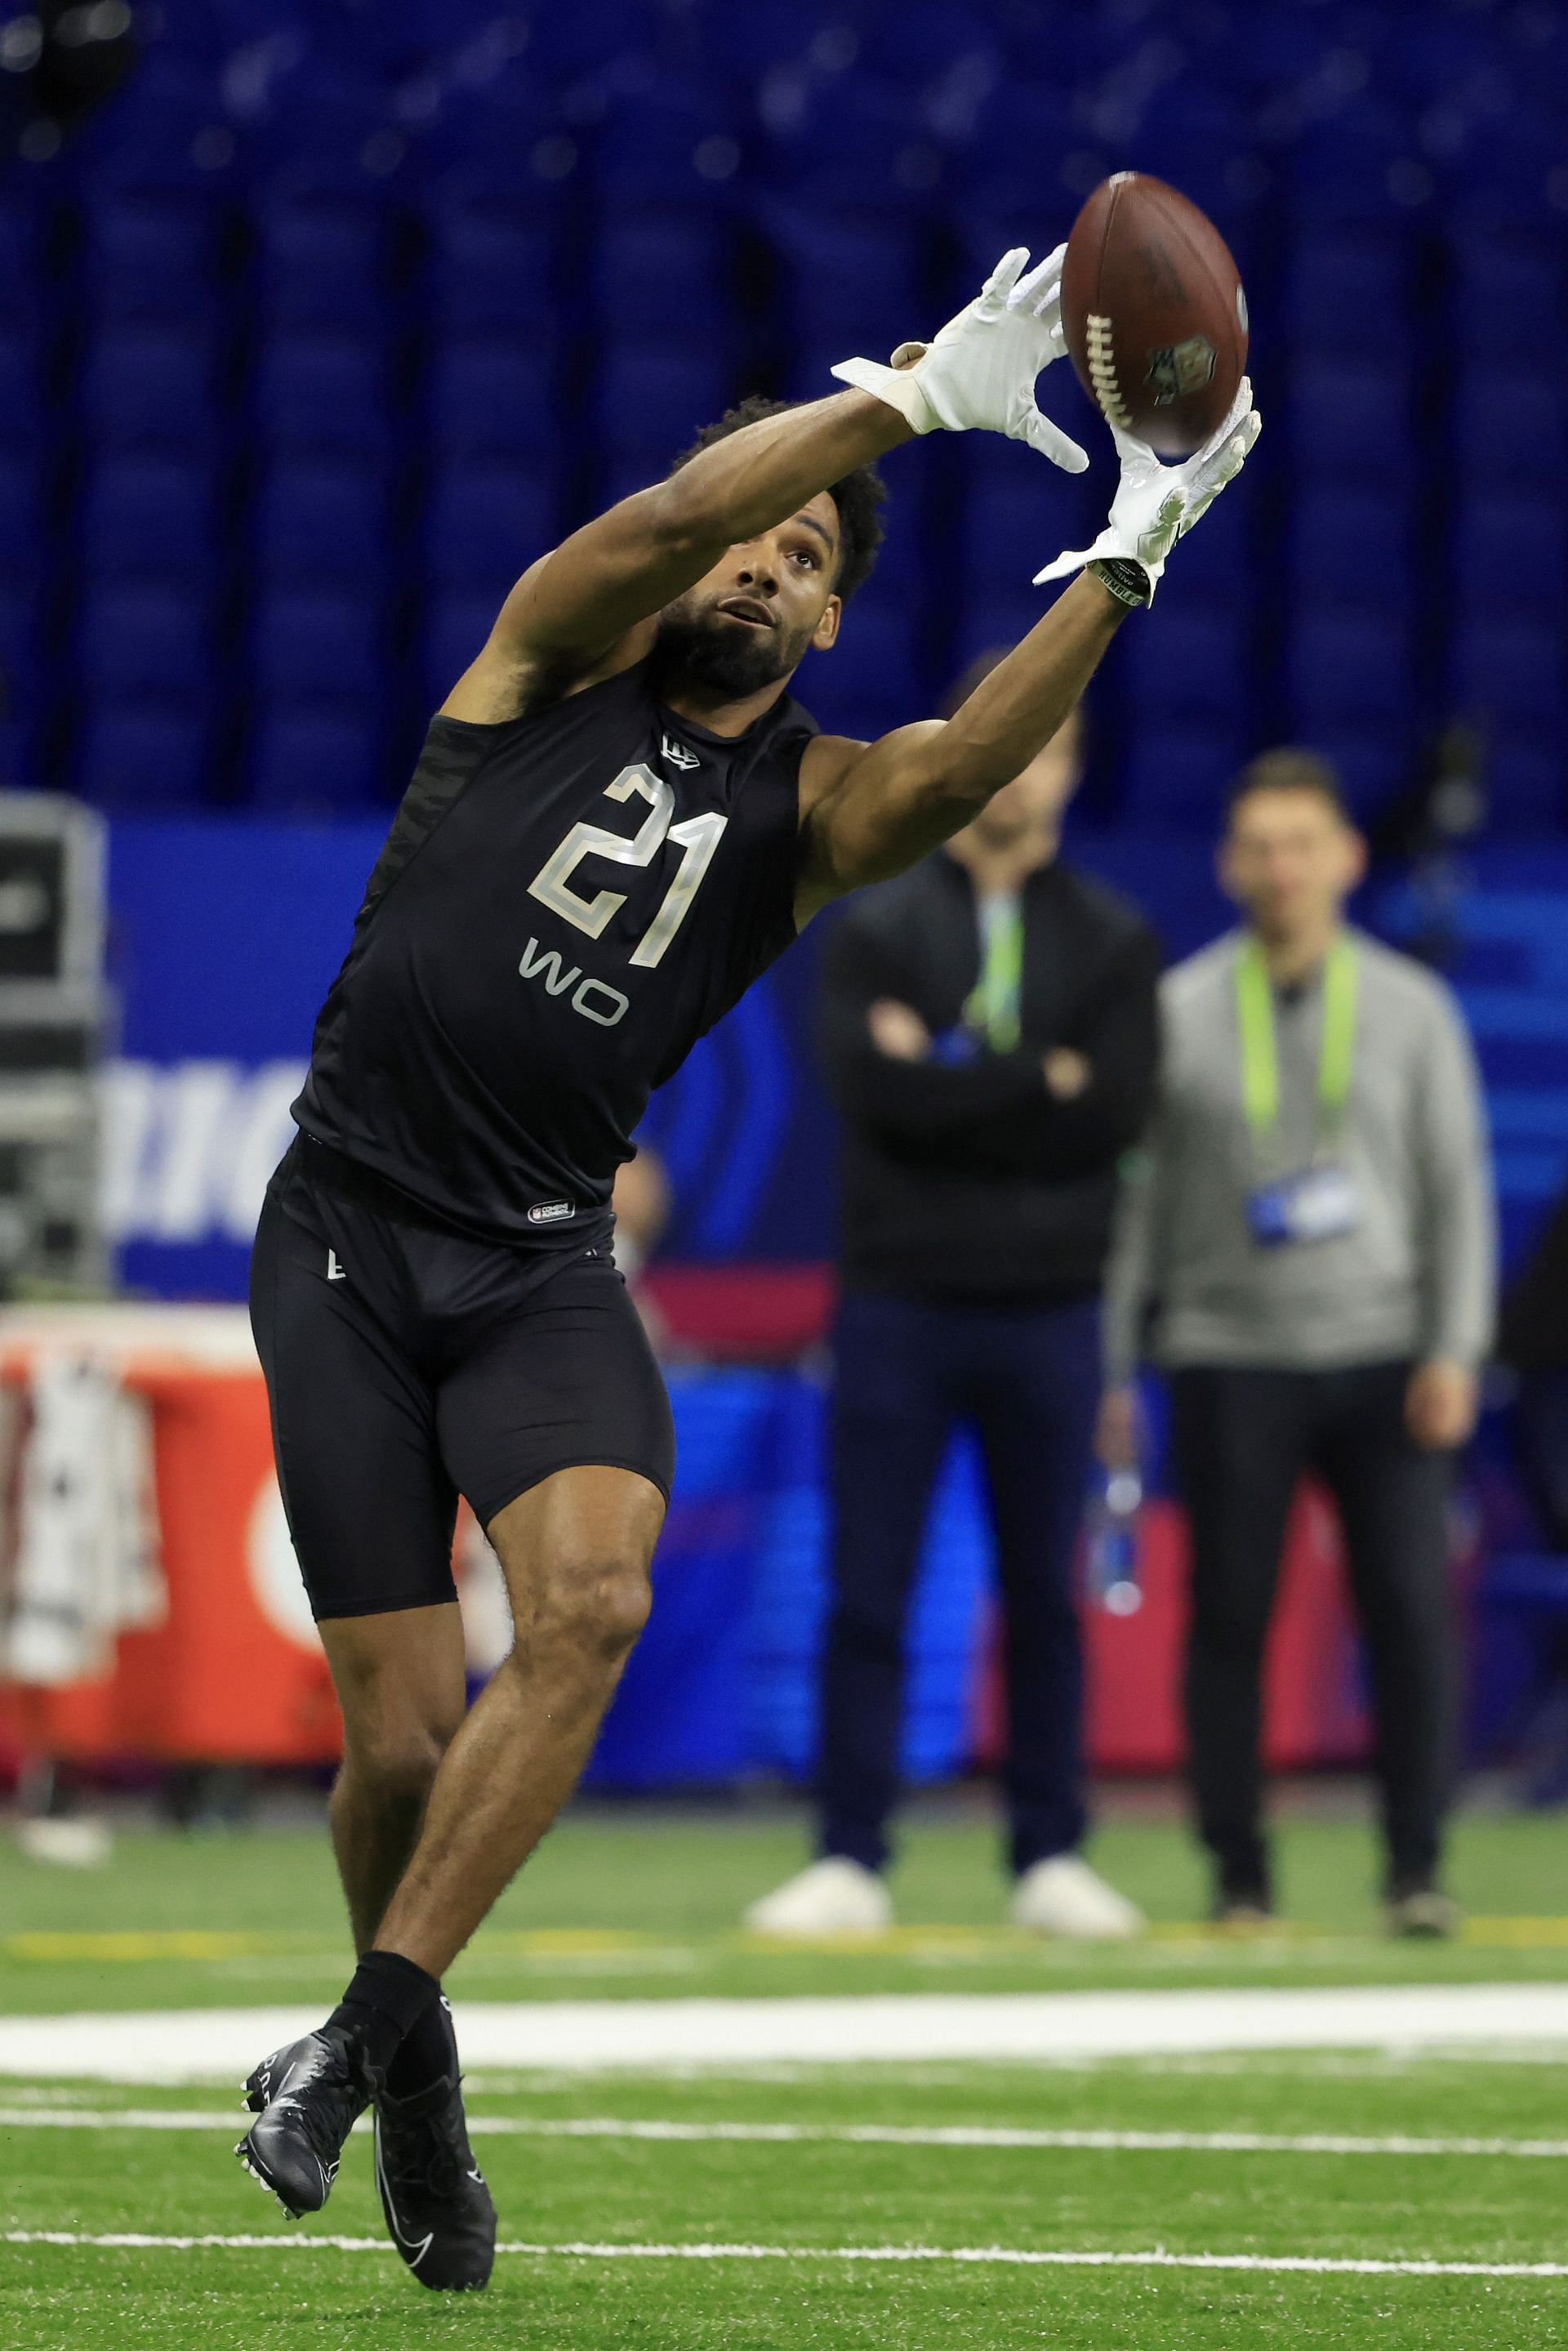 Chris Olave is interesting teams in the 2022 NFL Draft